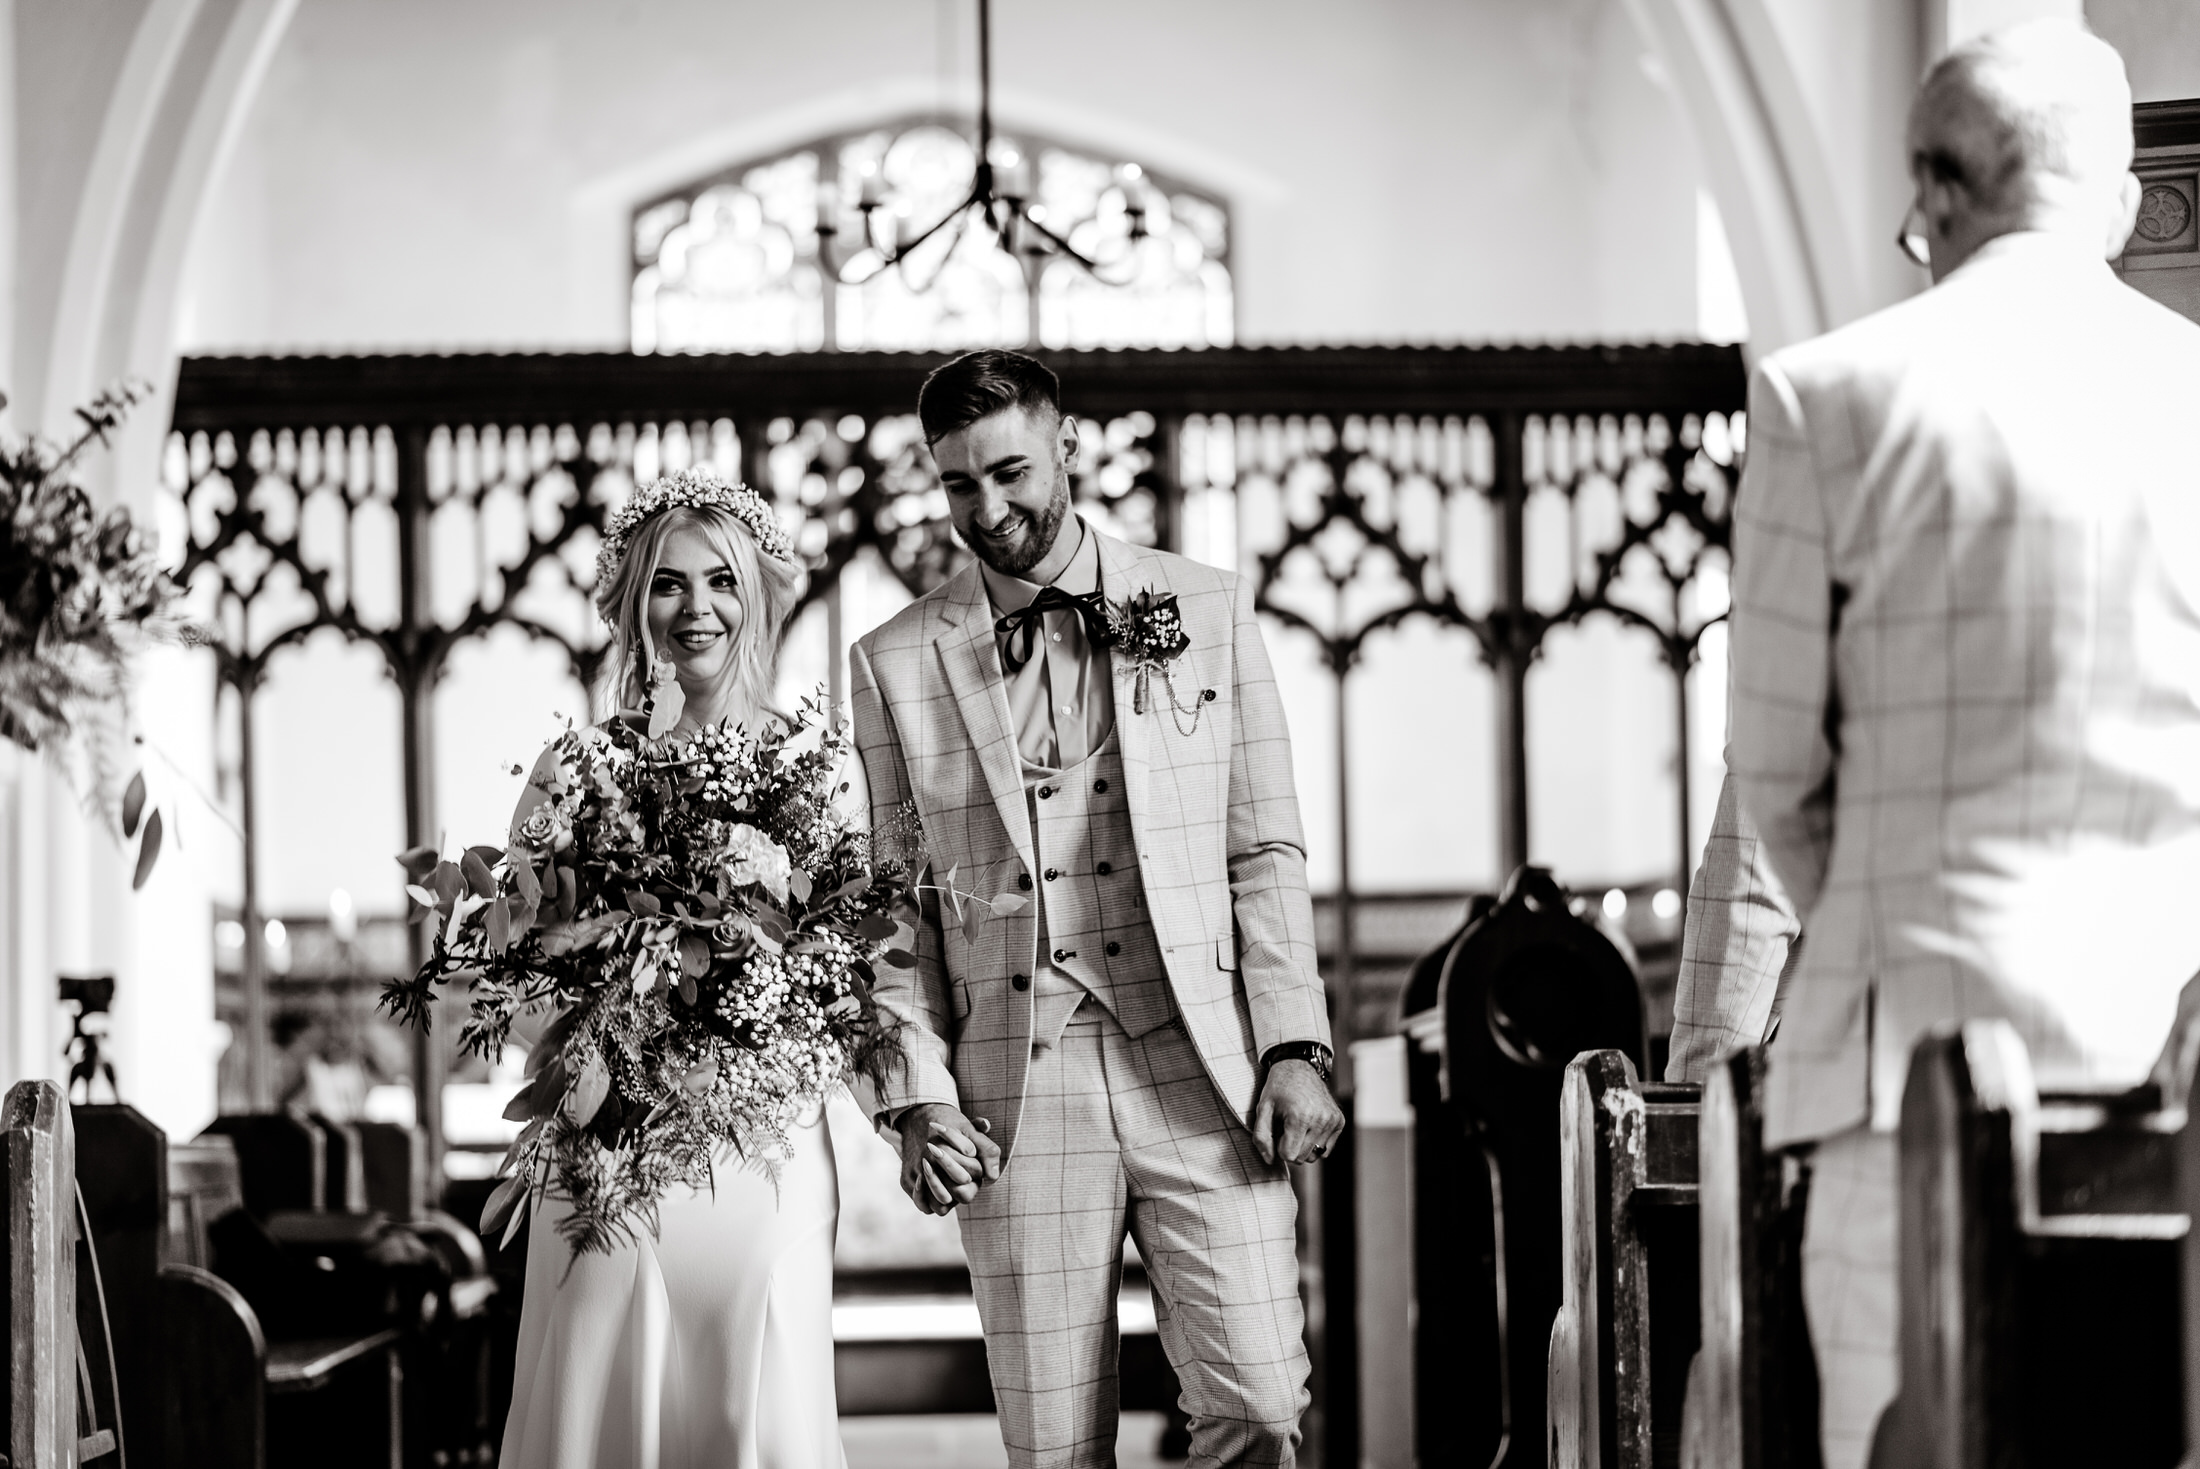 A wedding couple gracefully walking down the aisle of a church.